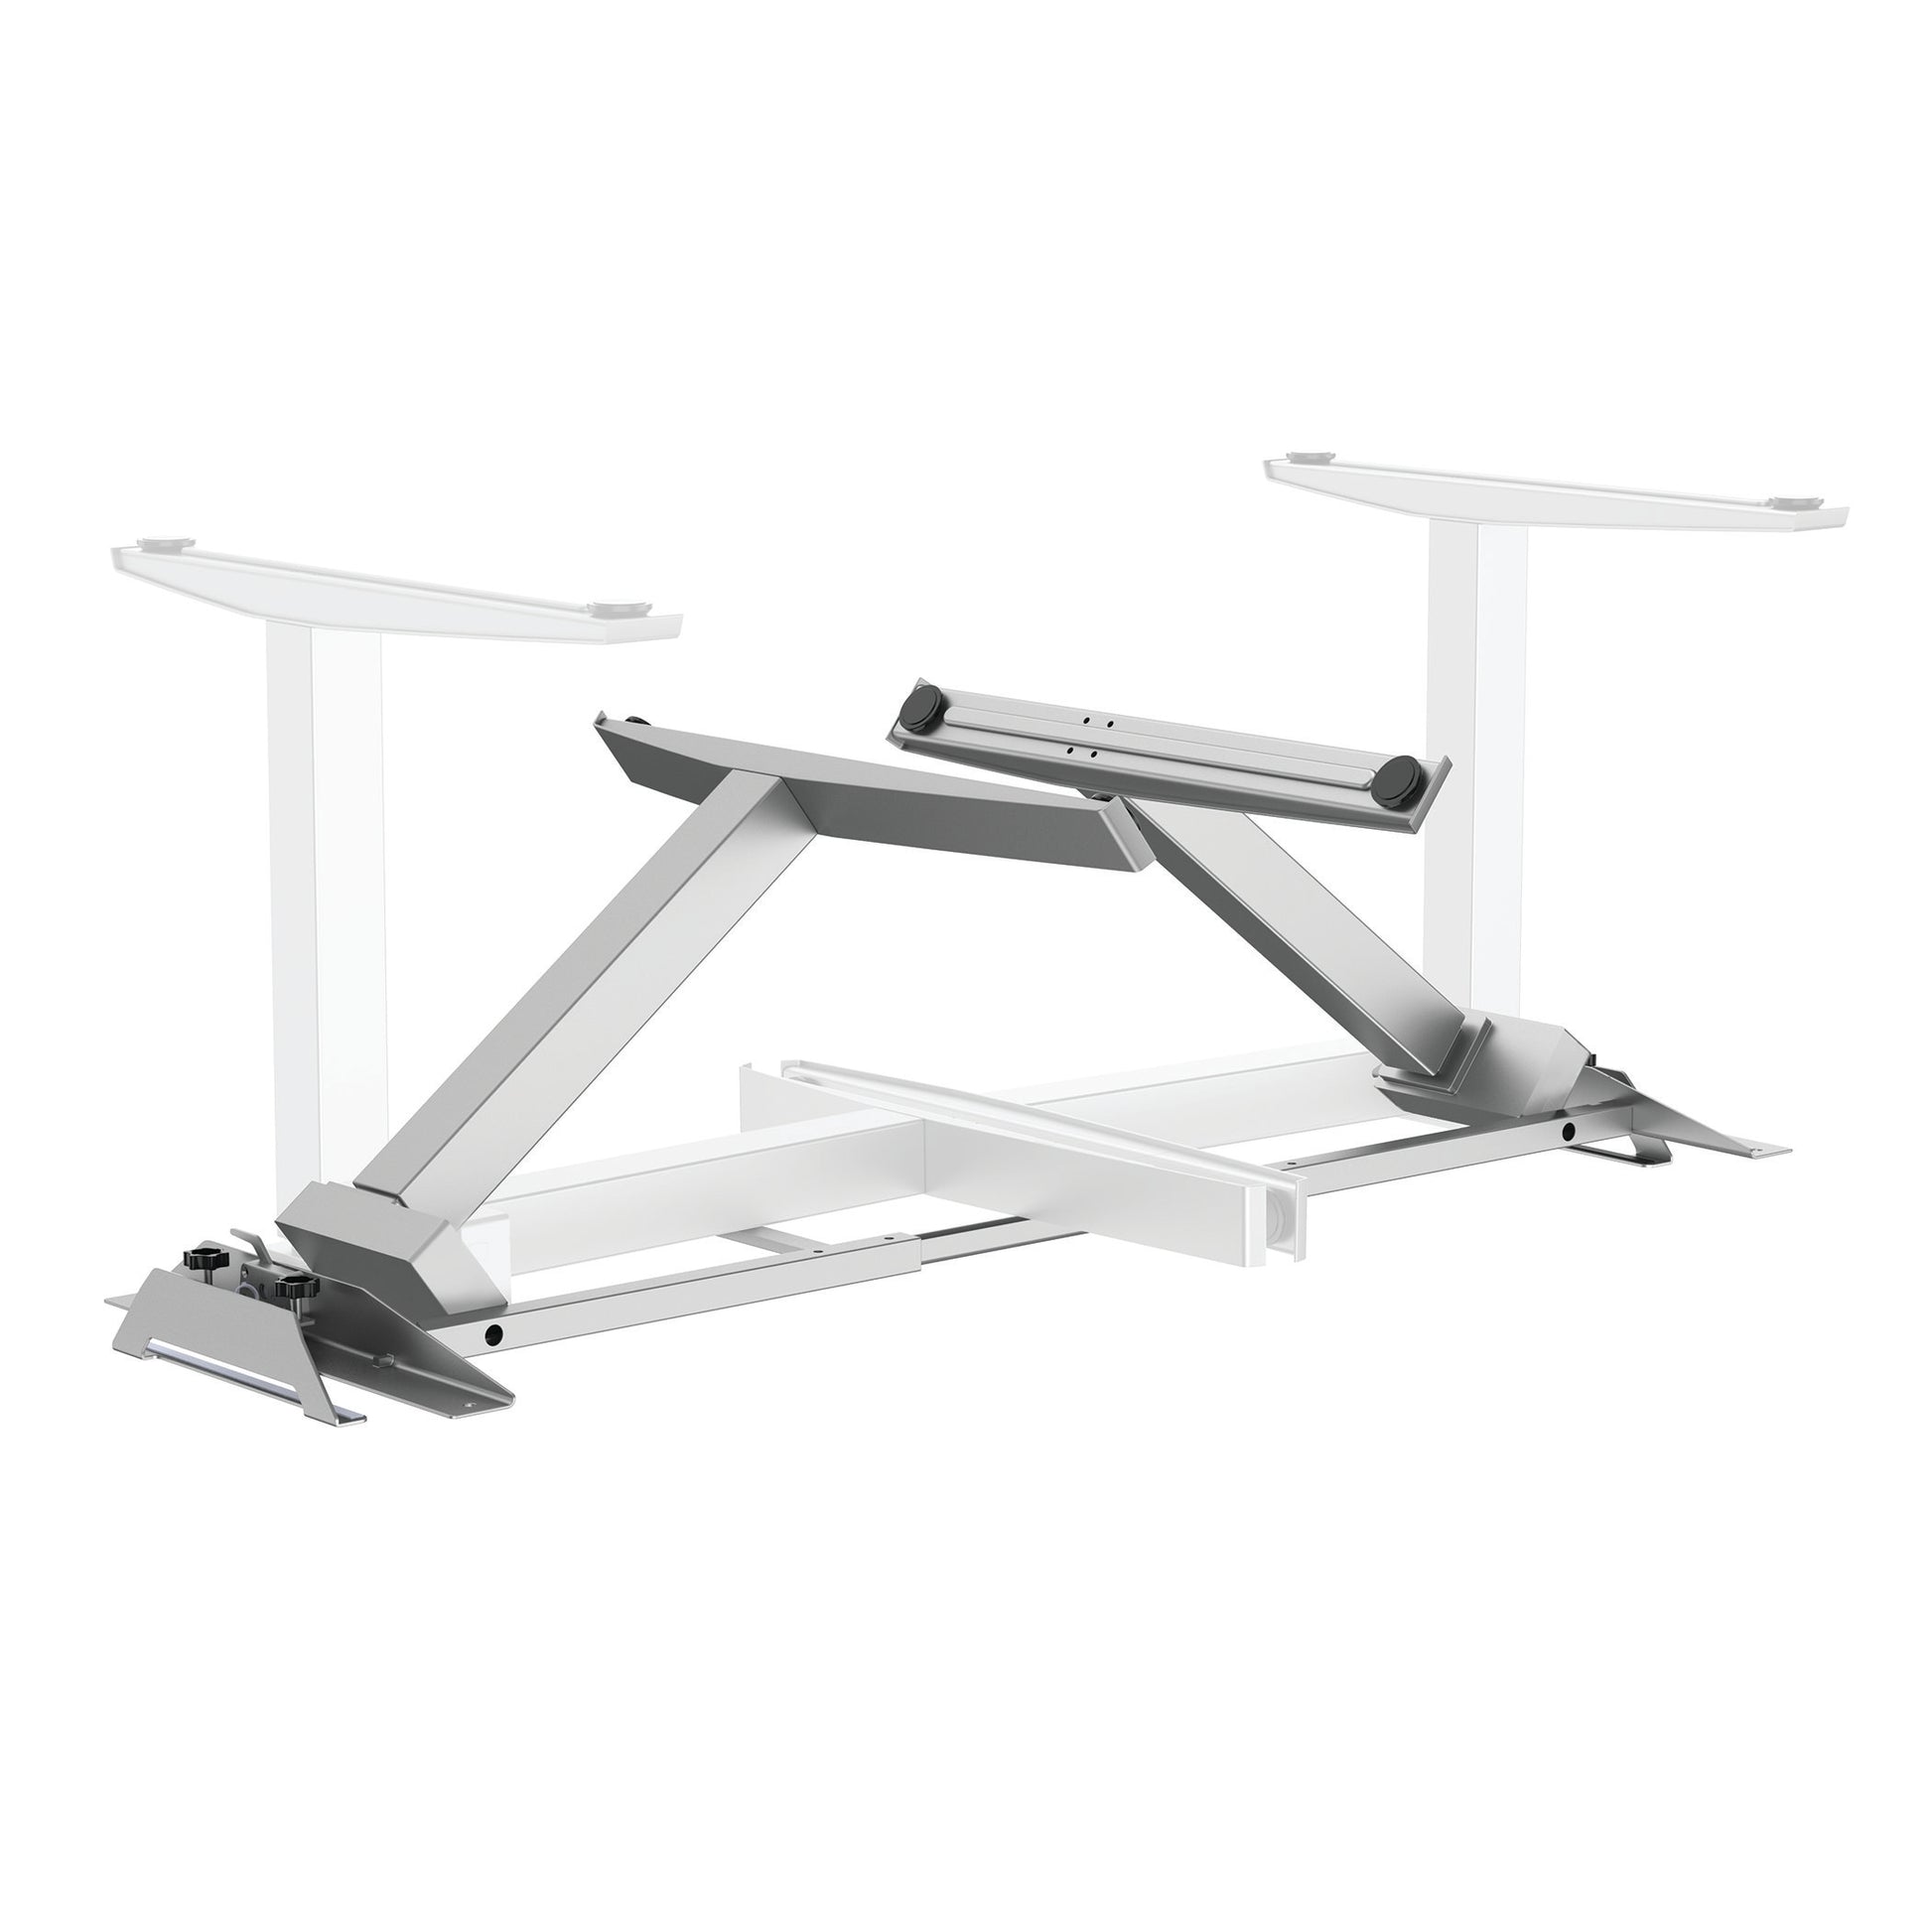 BUY FELOOWES Levado Height Adjustable Desk FREE SHIPPING 8949401. Standing desk/sit stand desk/stand up desk available with base only.